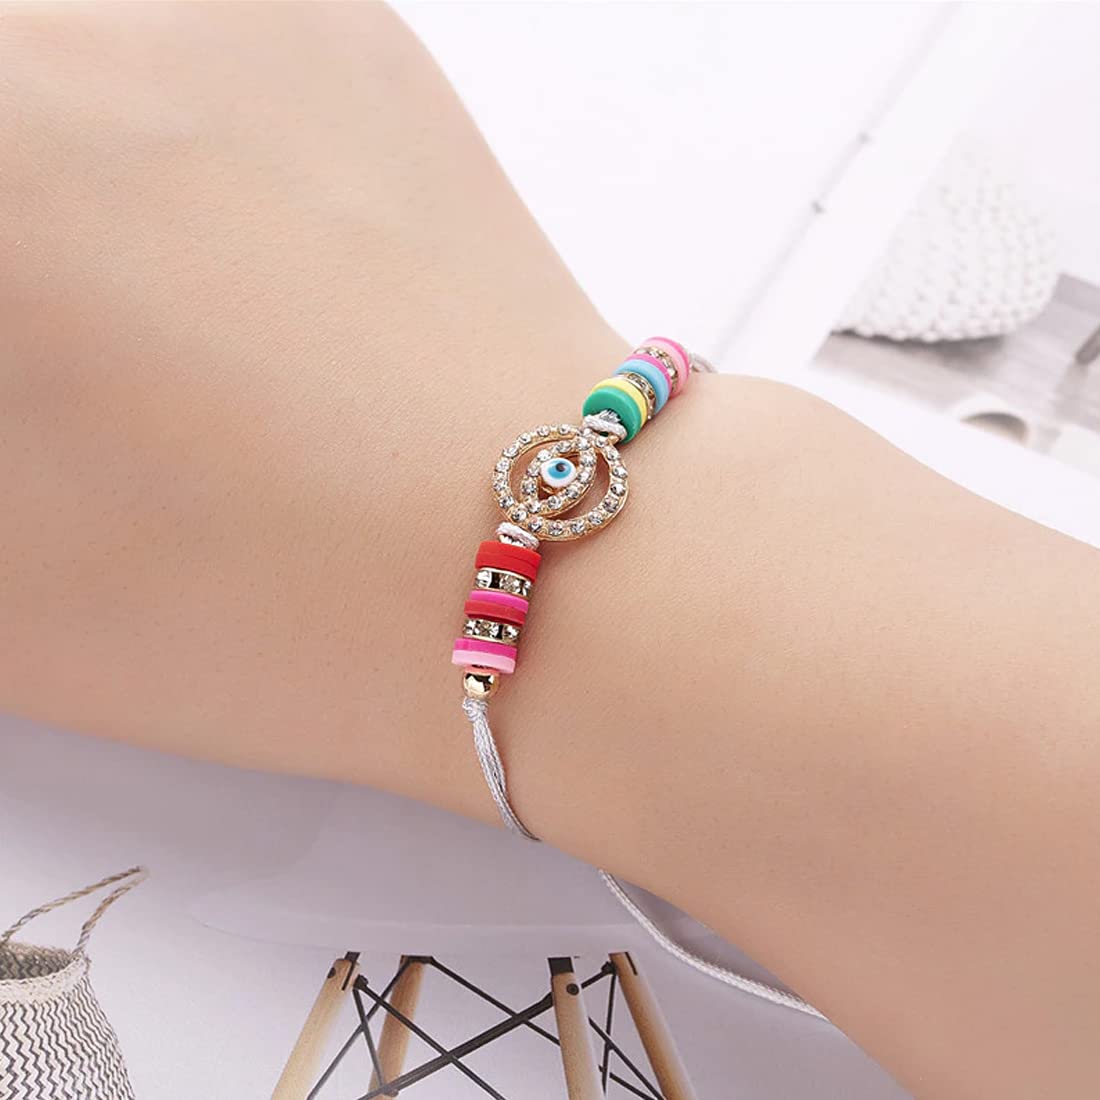 Buy blinkNshop Charm Bracelets for Girls, Elegant Cute Friendship Bracelets  Stainless Steel Bangle with birthday Gift box, Adjustable Girls Jewelry  Suitable for Rakhi, Friendship day, Valentine Gifts at Amazon.in